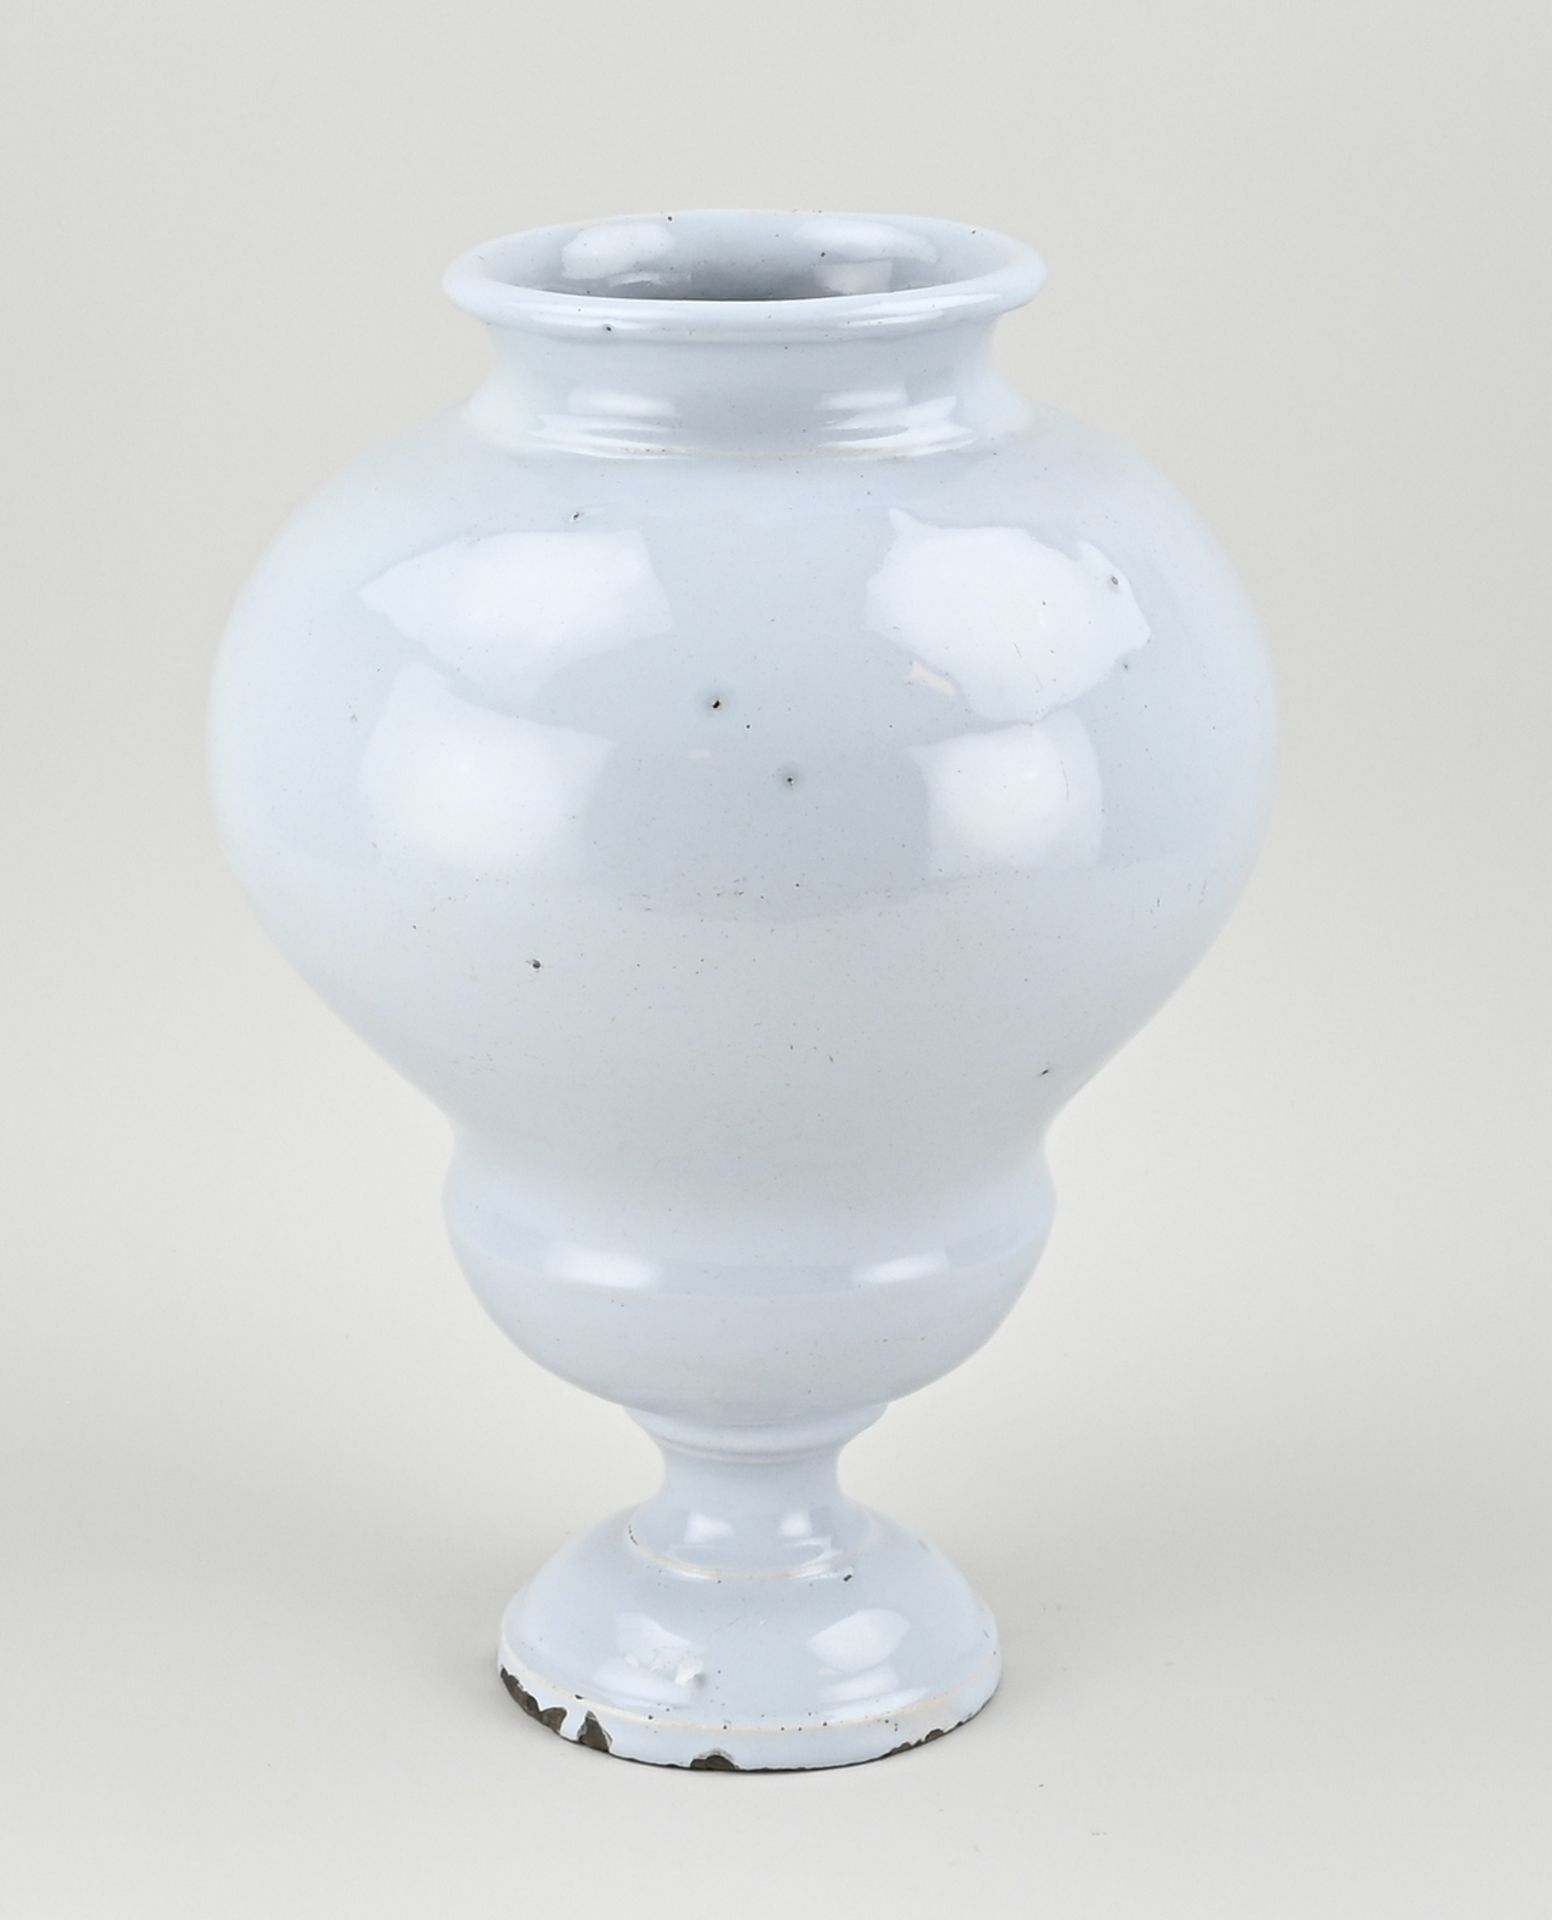 Delft apothecary jar, H 31.5 cm. - Image 2 of 3